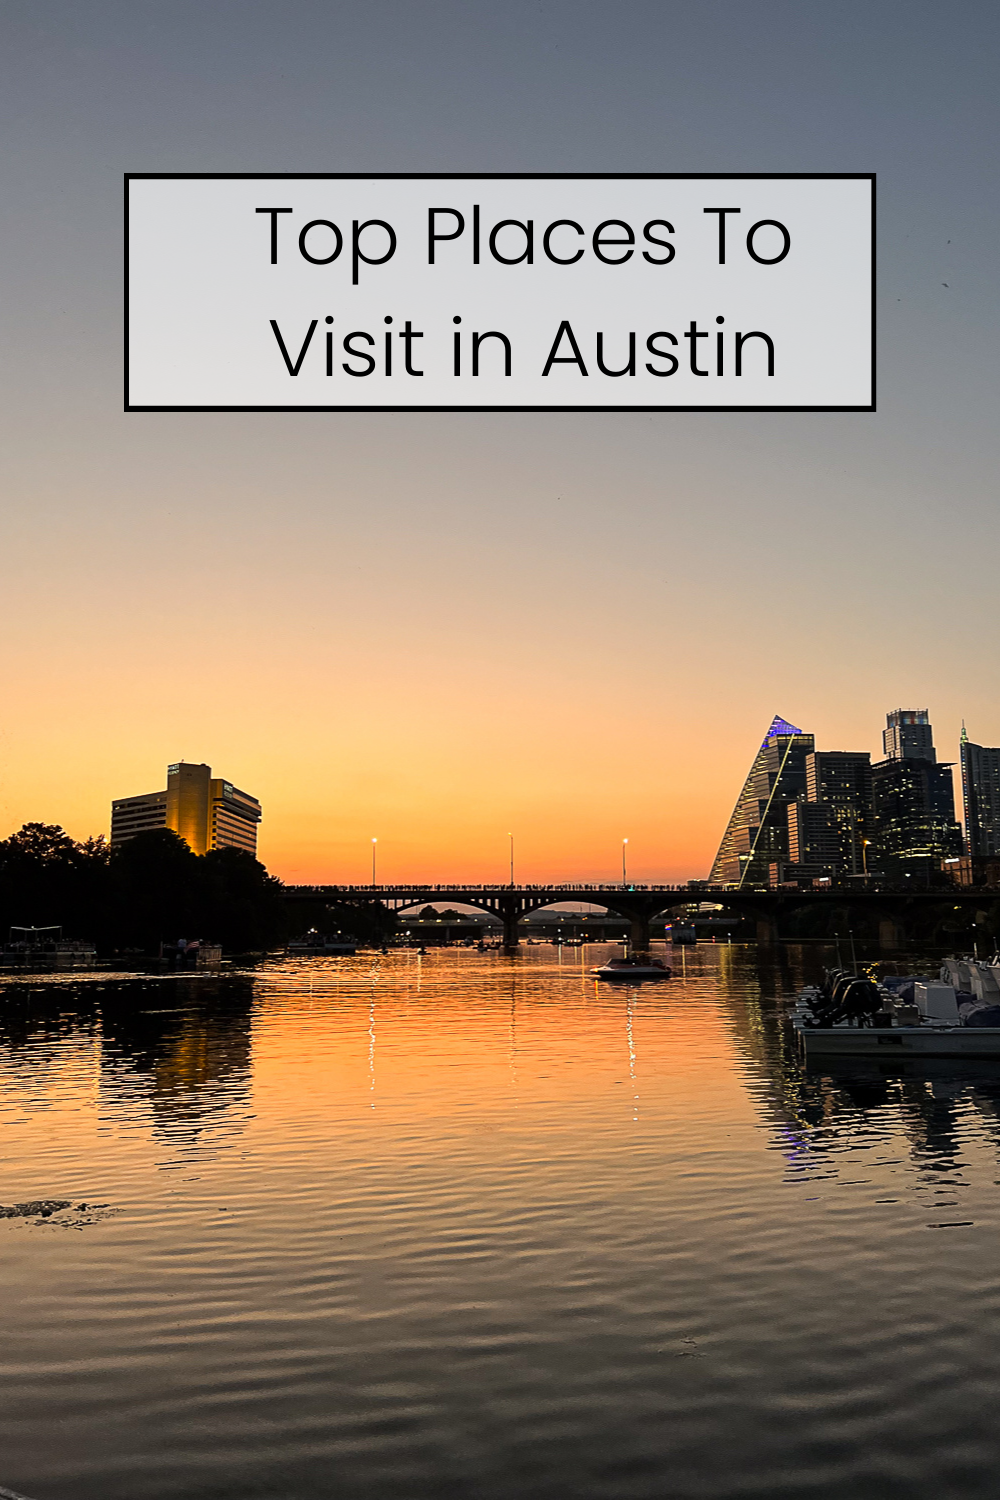 Pacific Globetrotters, budget family travel blog, shares Top Places To Visit In Austin. Congress Bridge